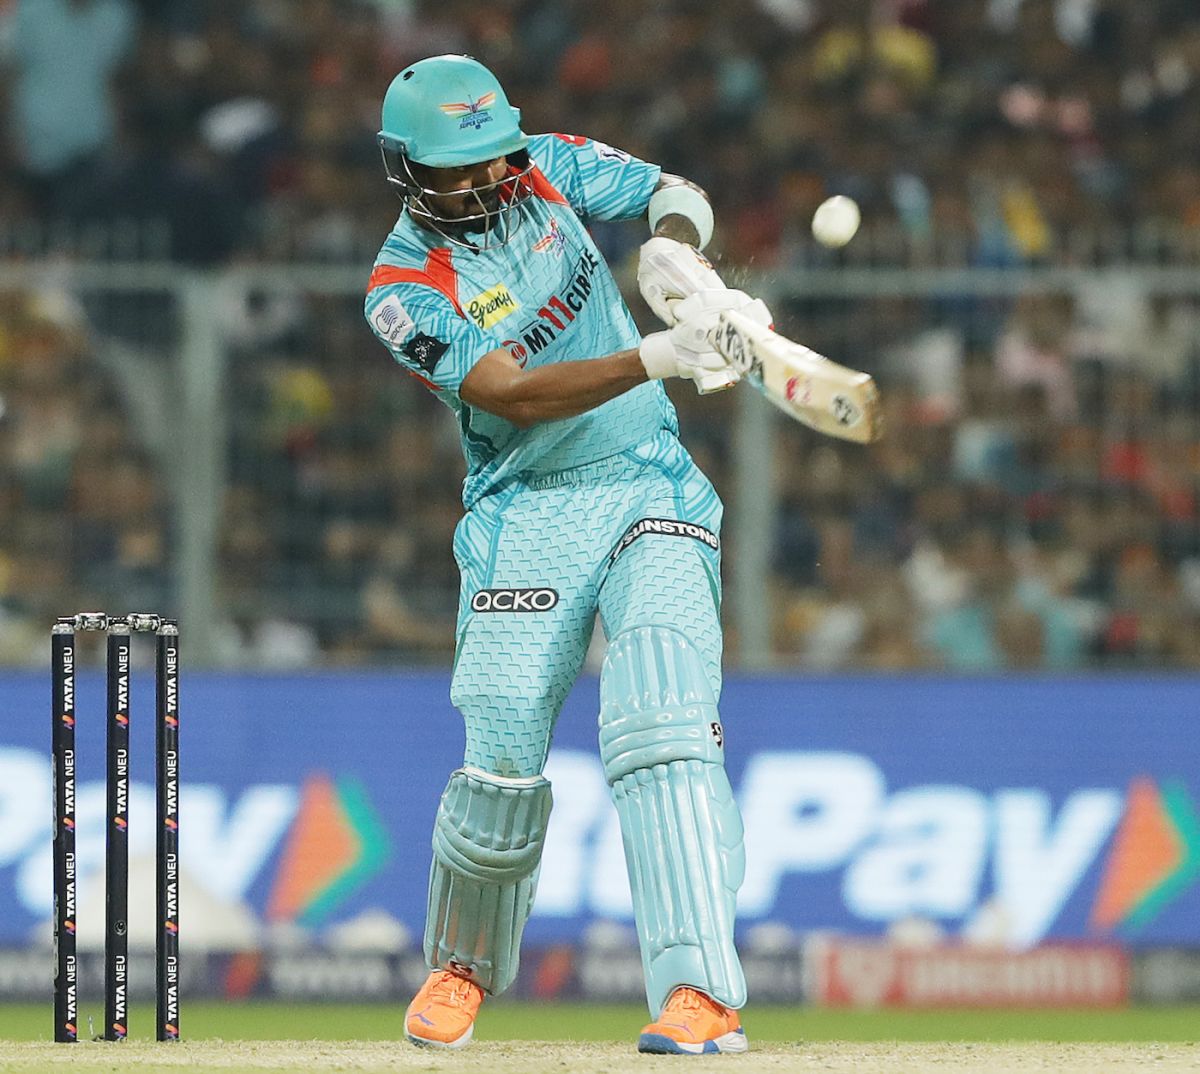 KL Rahul kept Super Giants in touch with the asking rate, Lucknow Super Giants vs Royal Challengers Bangalore, IPL 2022 Eliminator, Kolkata, May 25, 2022